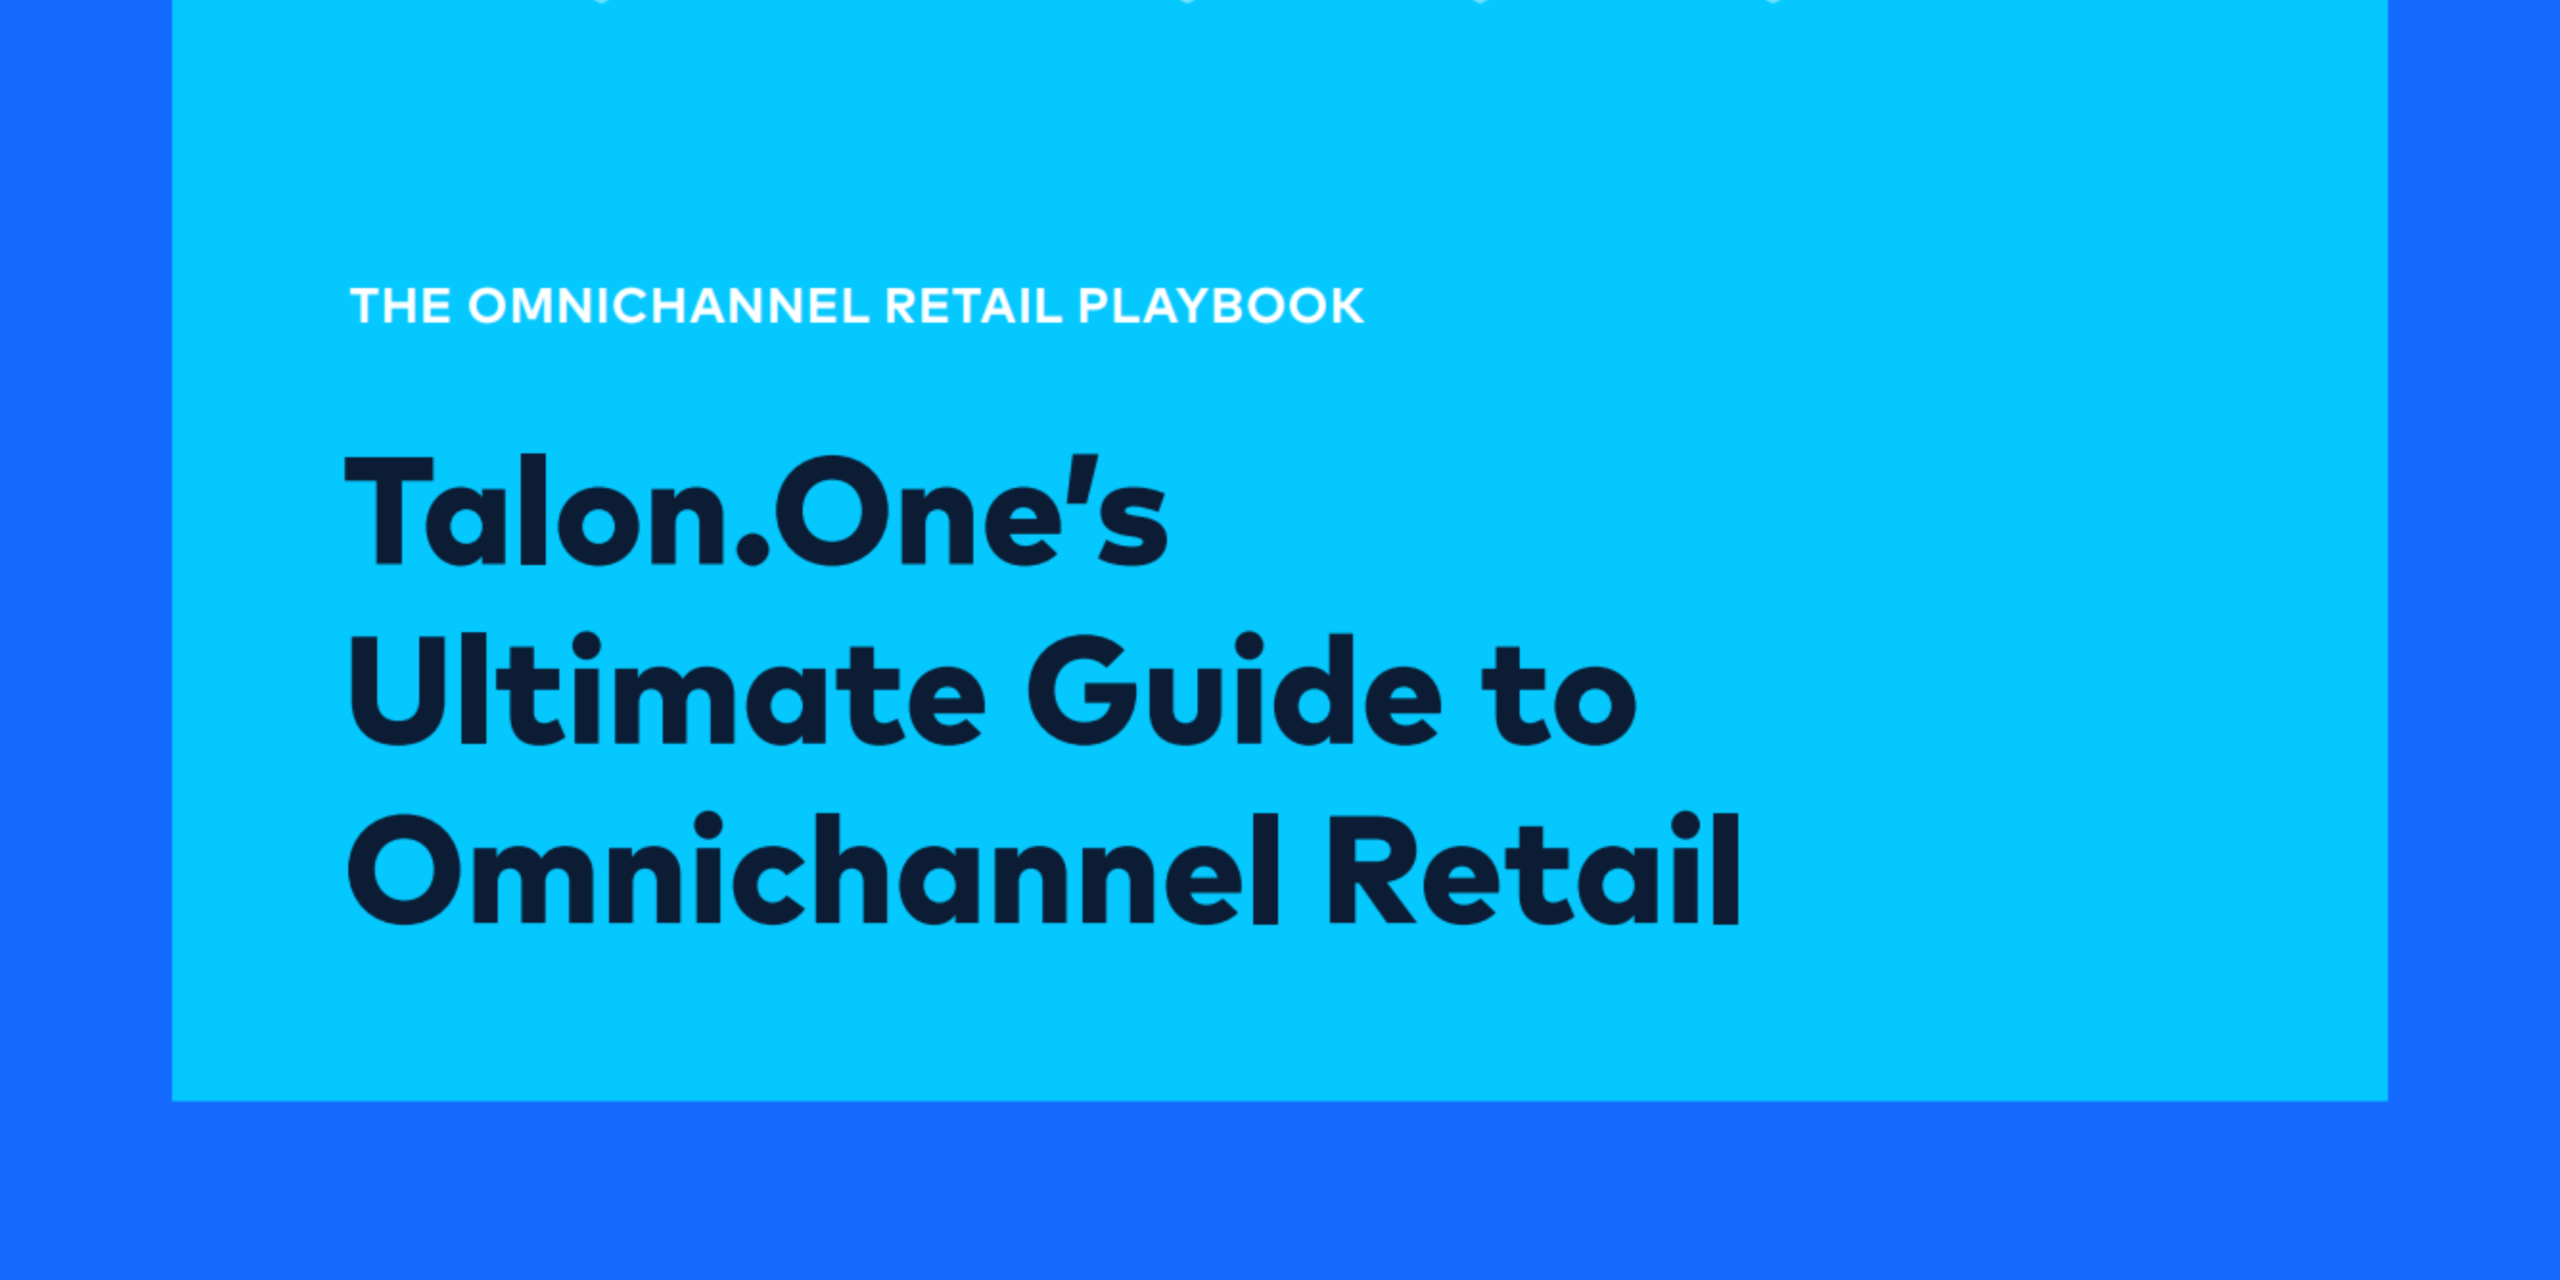 Omnichannel Retail Playbook from Talon.One 2